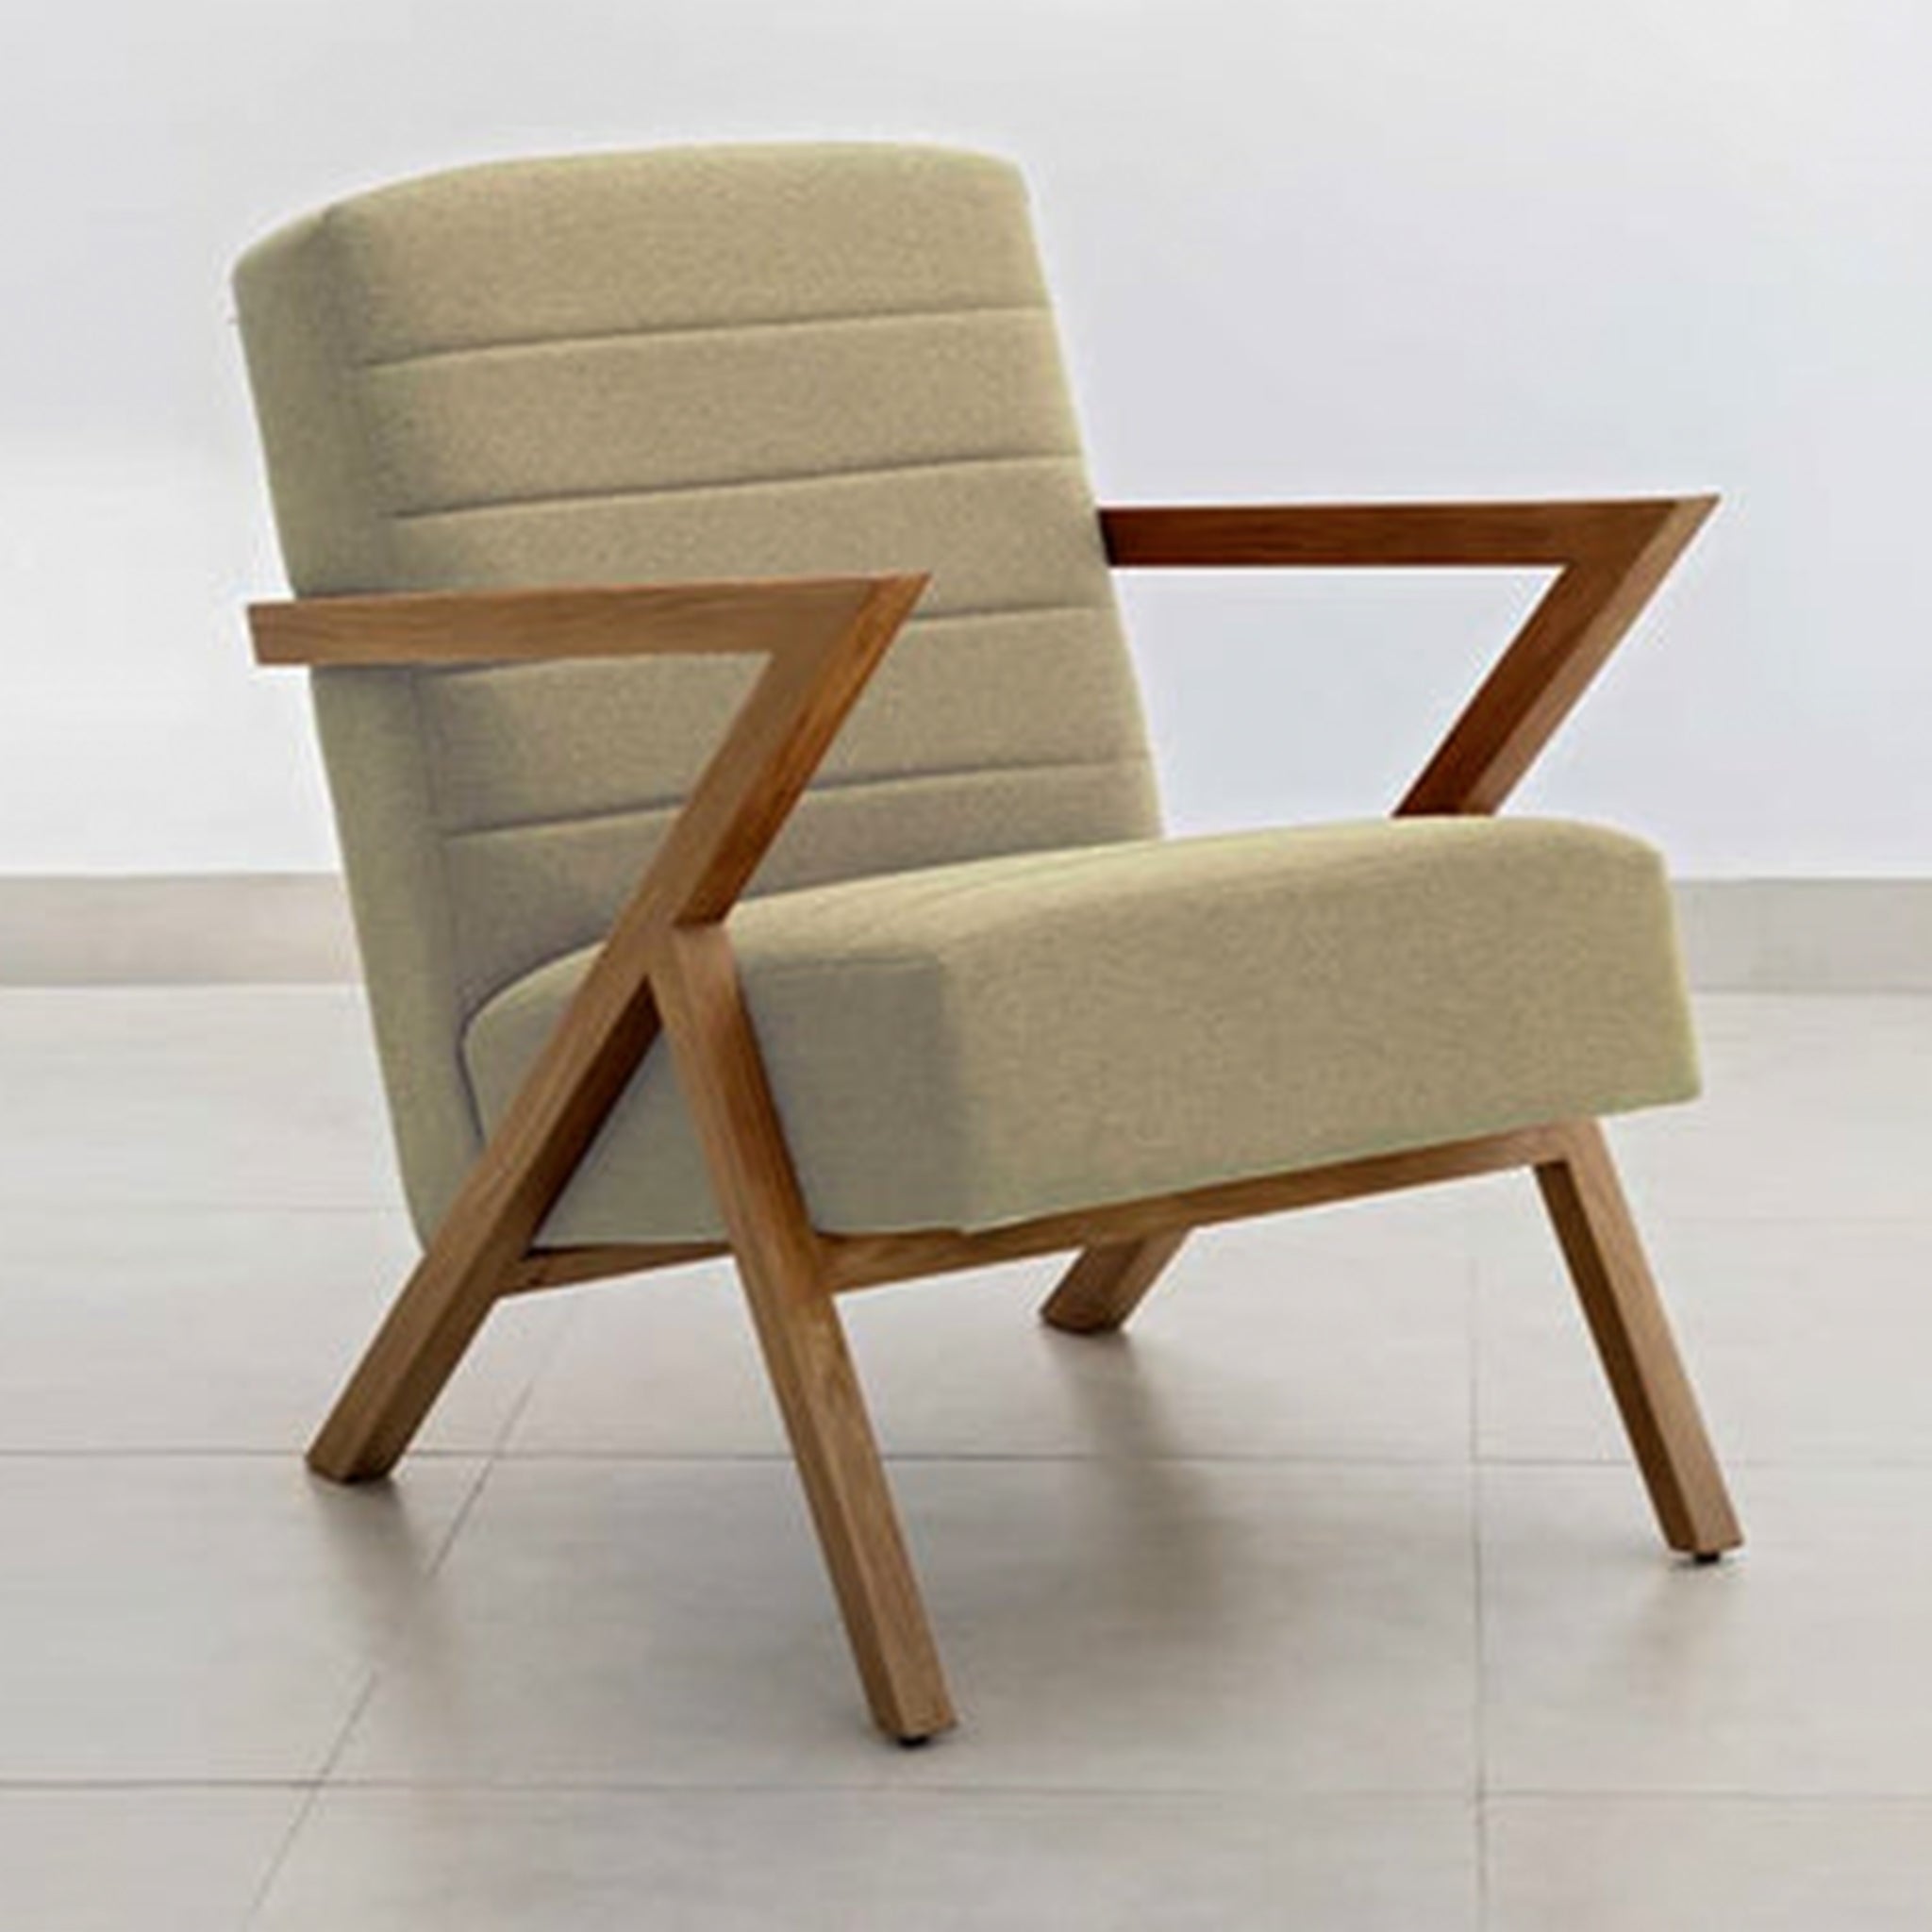 Upholstered accent chair with wooden legs and armrests